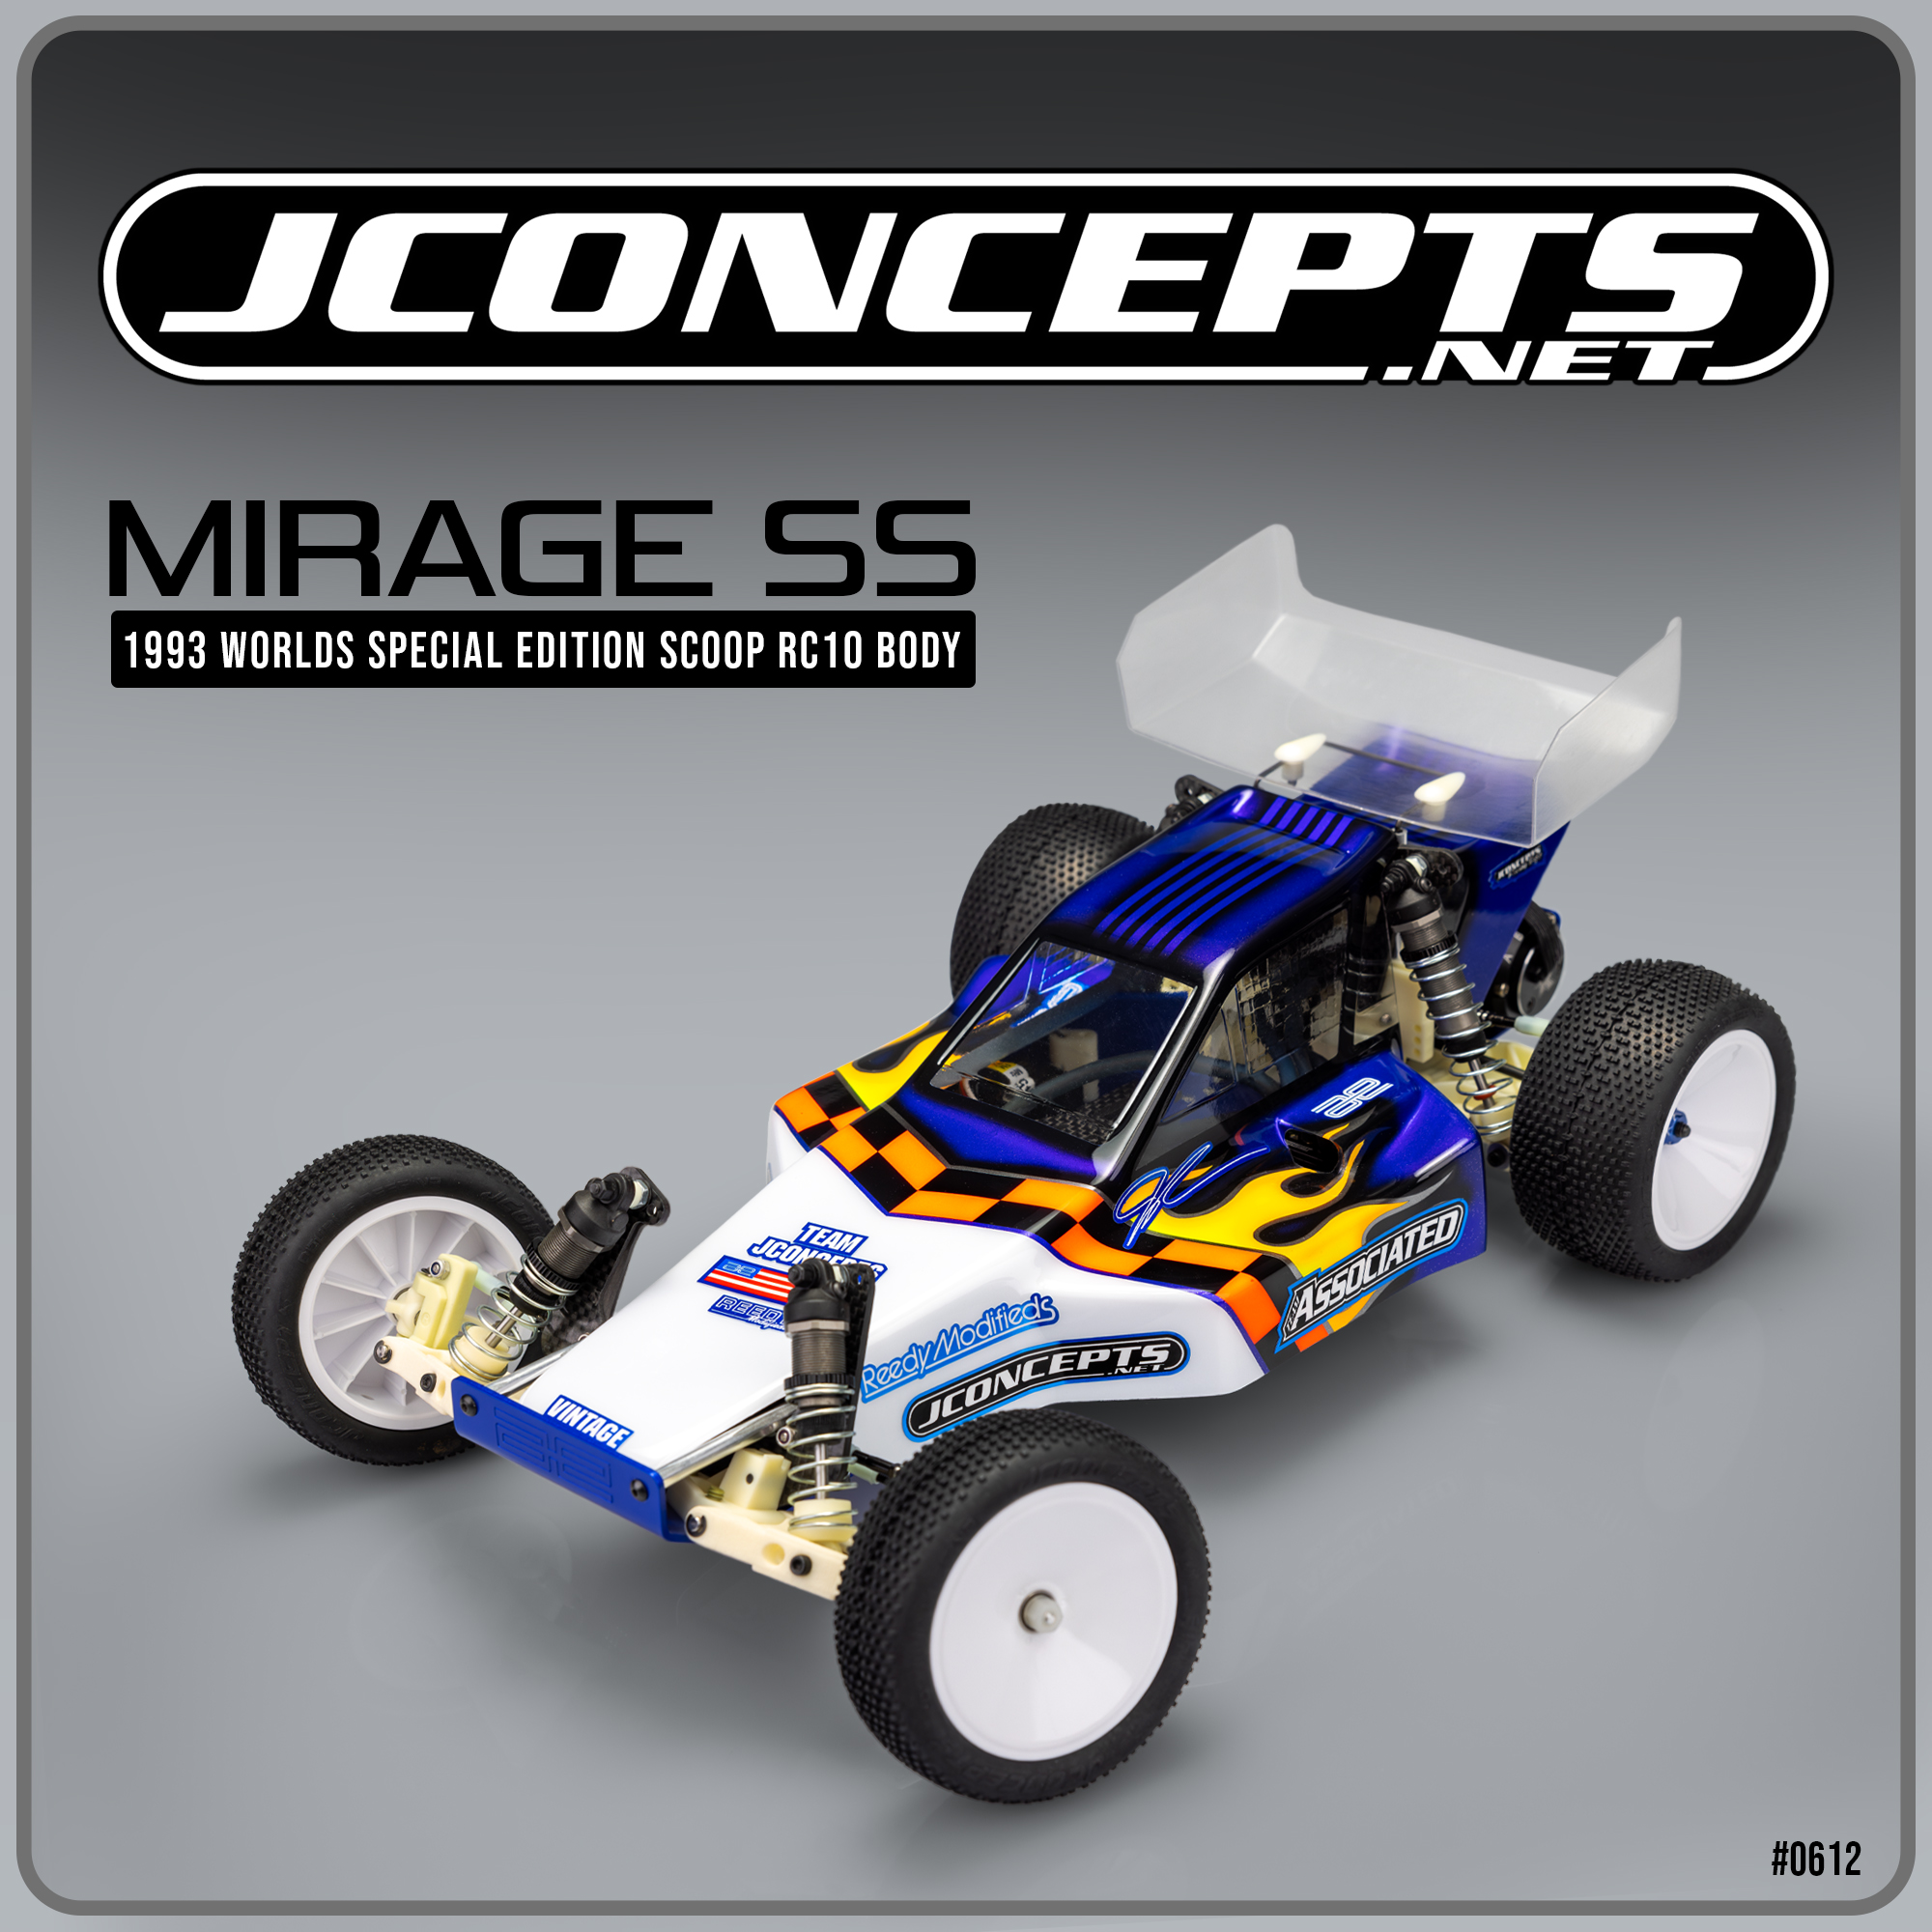 JConcepts New Release – Mirage WSE SS, 1993 Worlds Special Edition